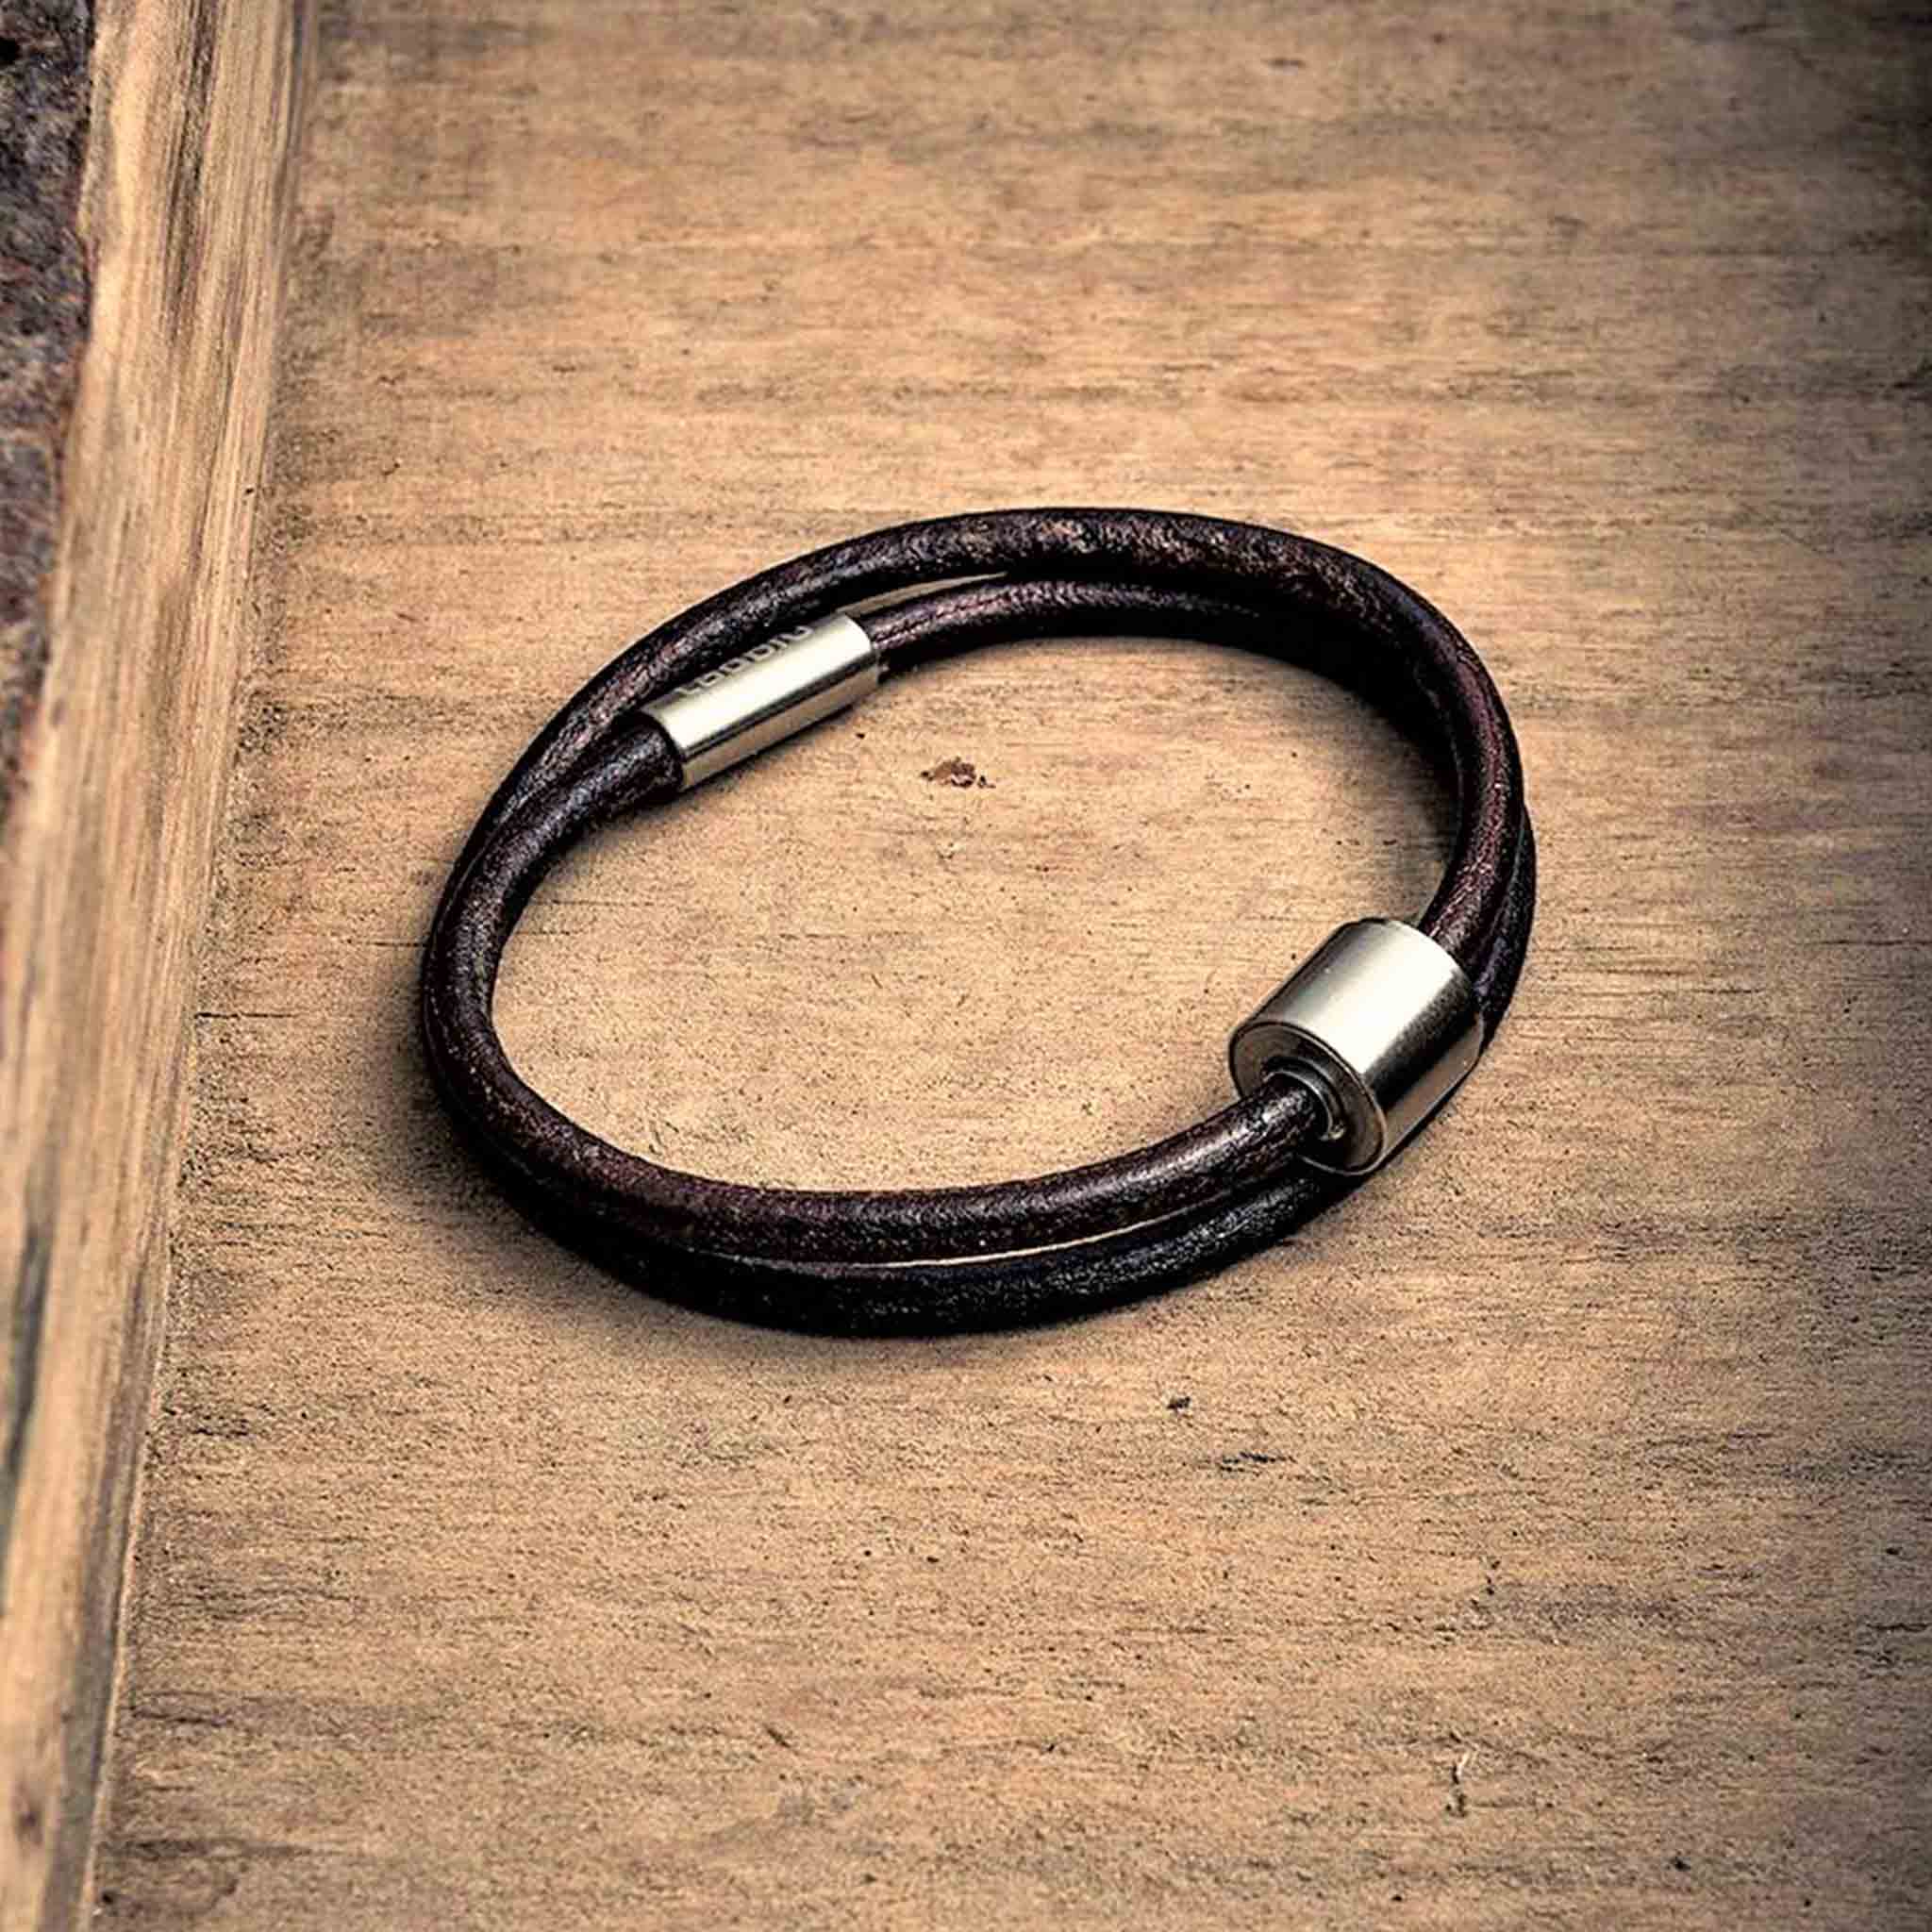 Leather Ashes Bracelet for Men in Brown on Surface